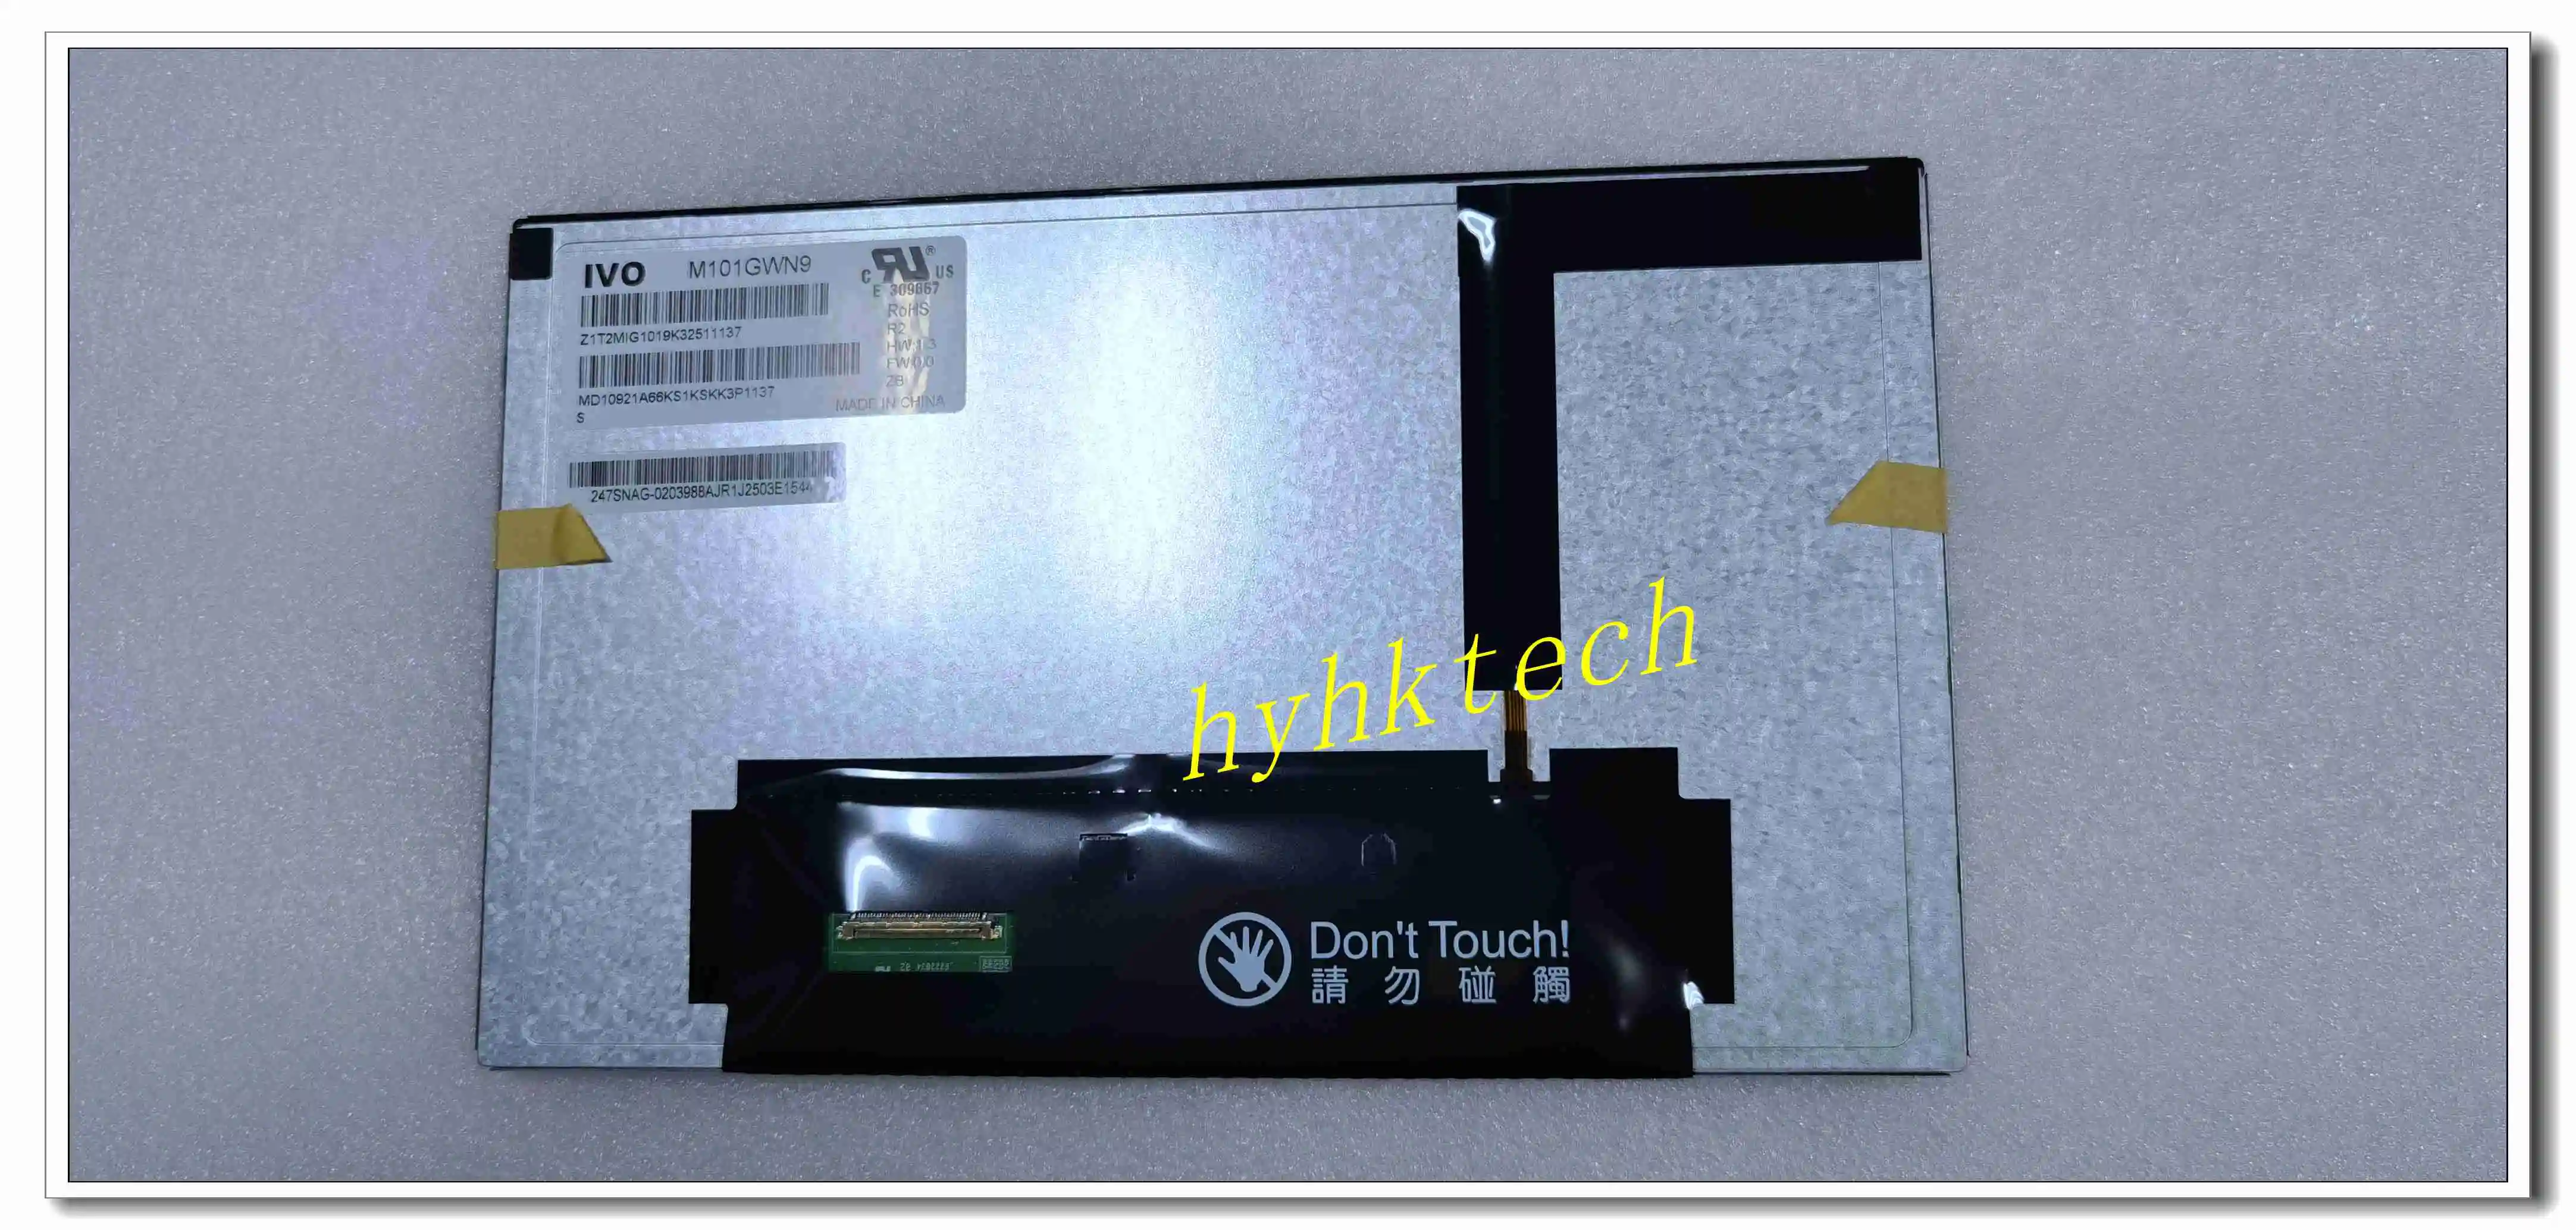 Free shipment M101GWN9 R2 10.1 inch 1024*600 LVDS IPS , 10.1 inch LCD Panel, 100% Original,ready in stock